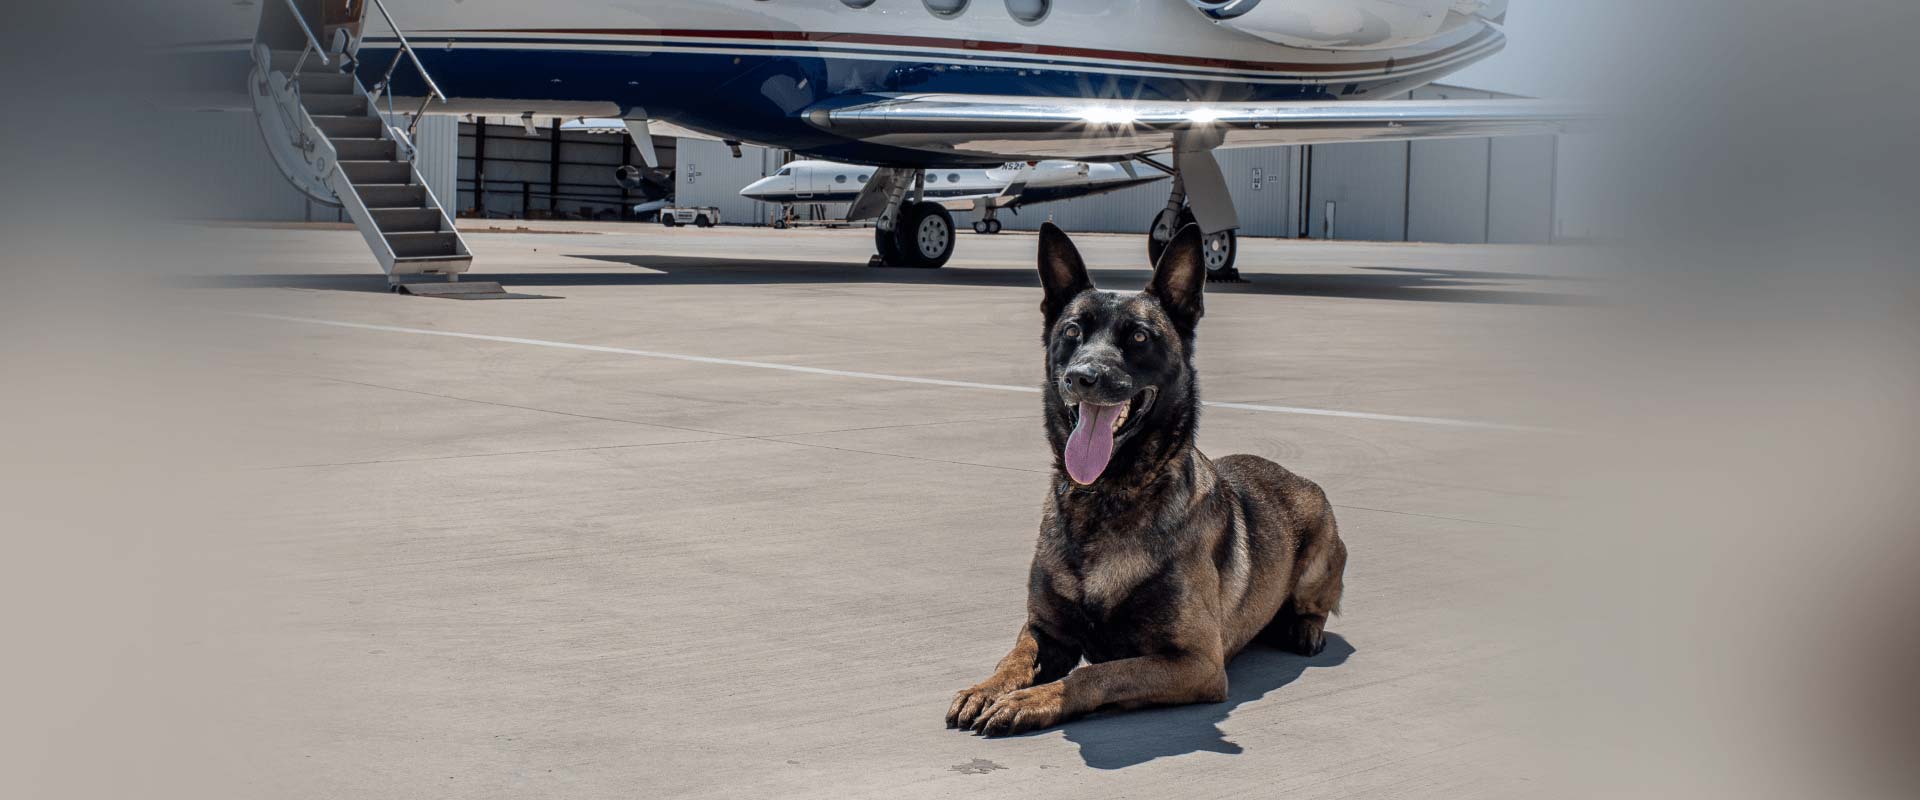 Belgian Malinois ready to protect the executive and family laying on runway